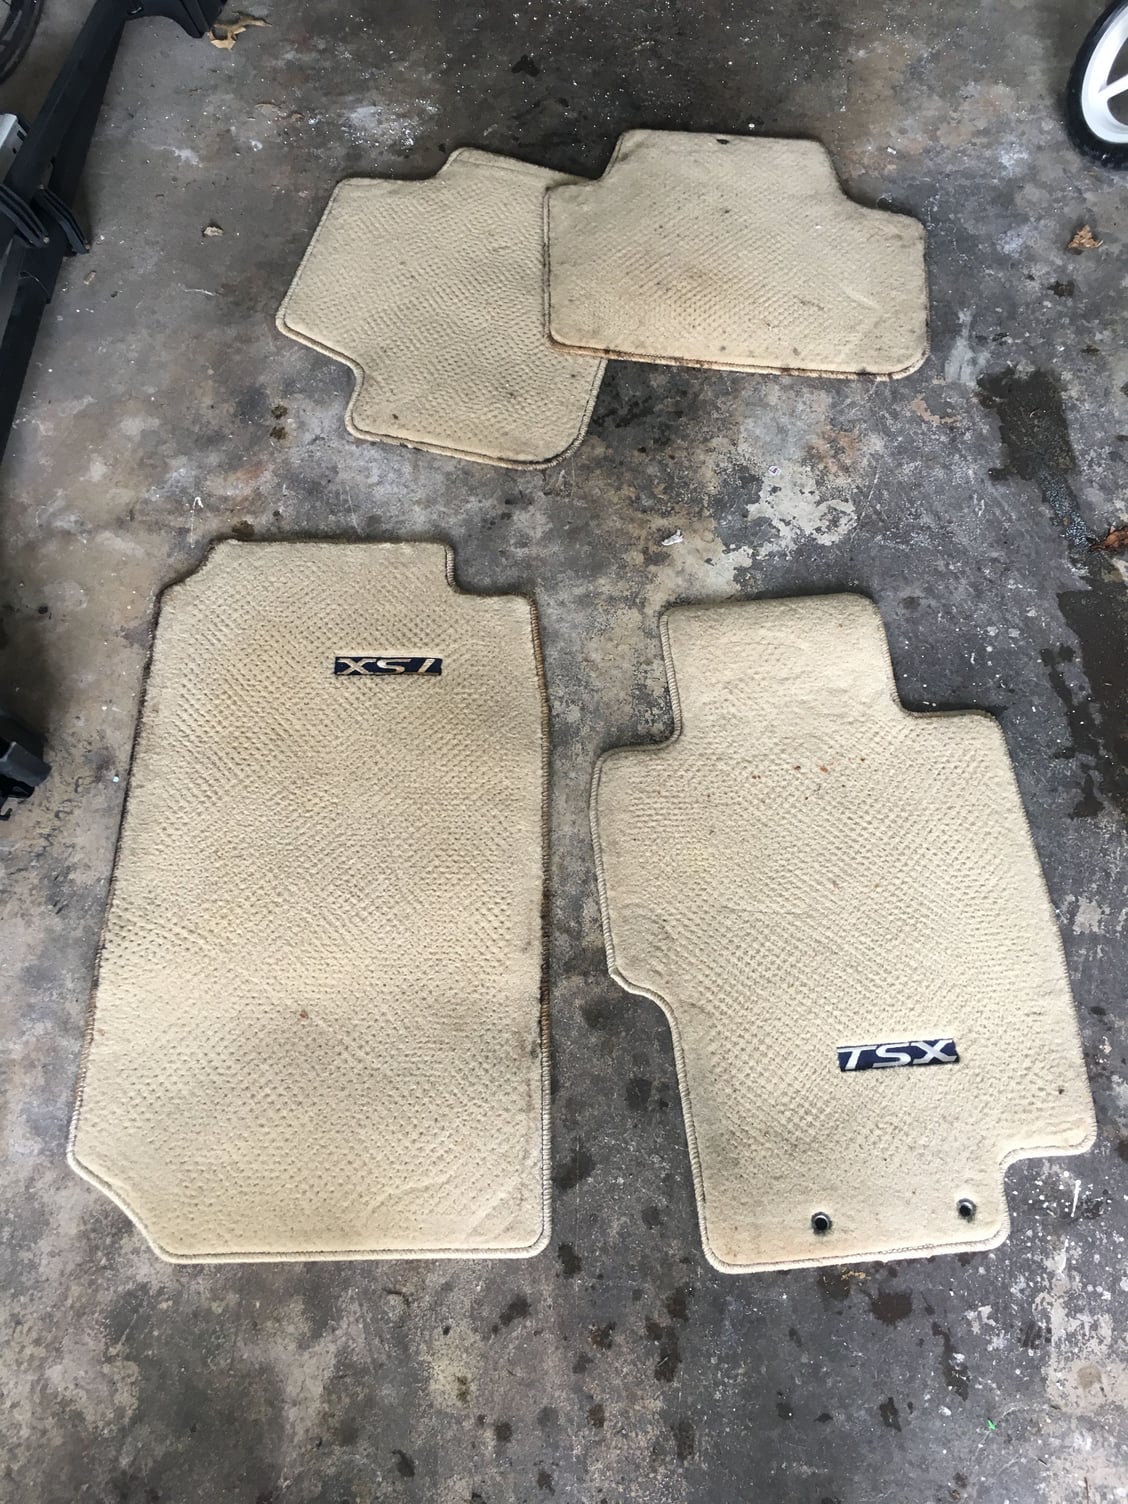 Accessories - FS: 2004 - 2008 trunk tray, carpet floor mats, and all weather floor mats - Used - 2004 to 2008 Acura TSX - West Orange, NJ 07052, United States